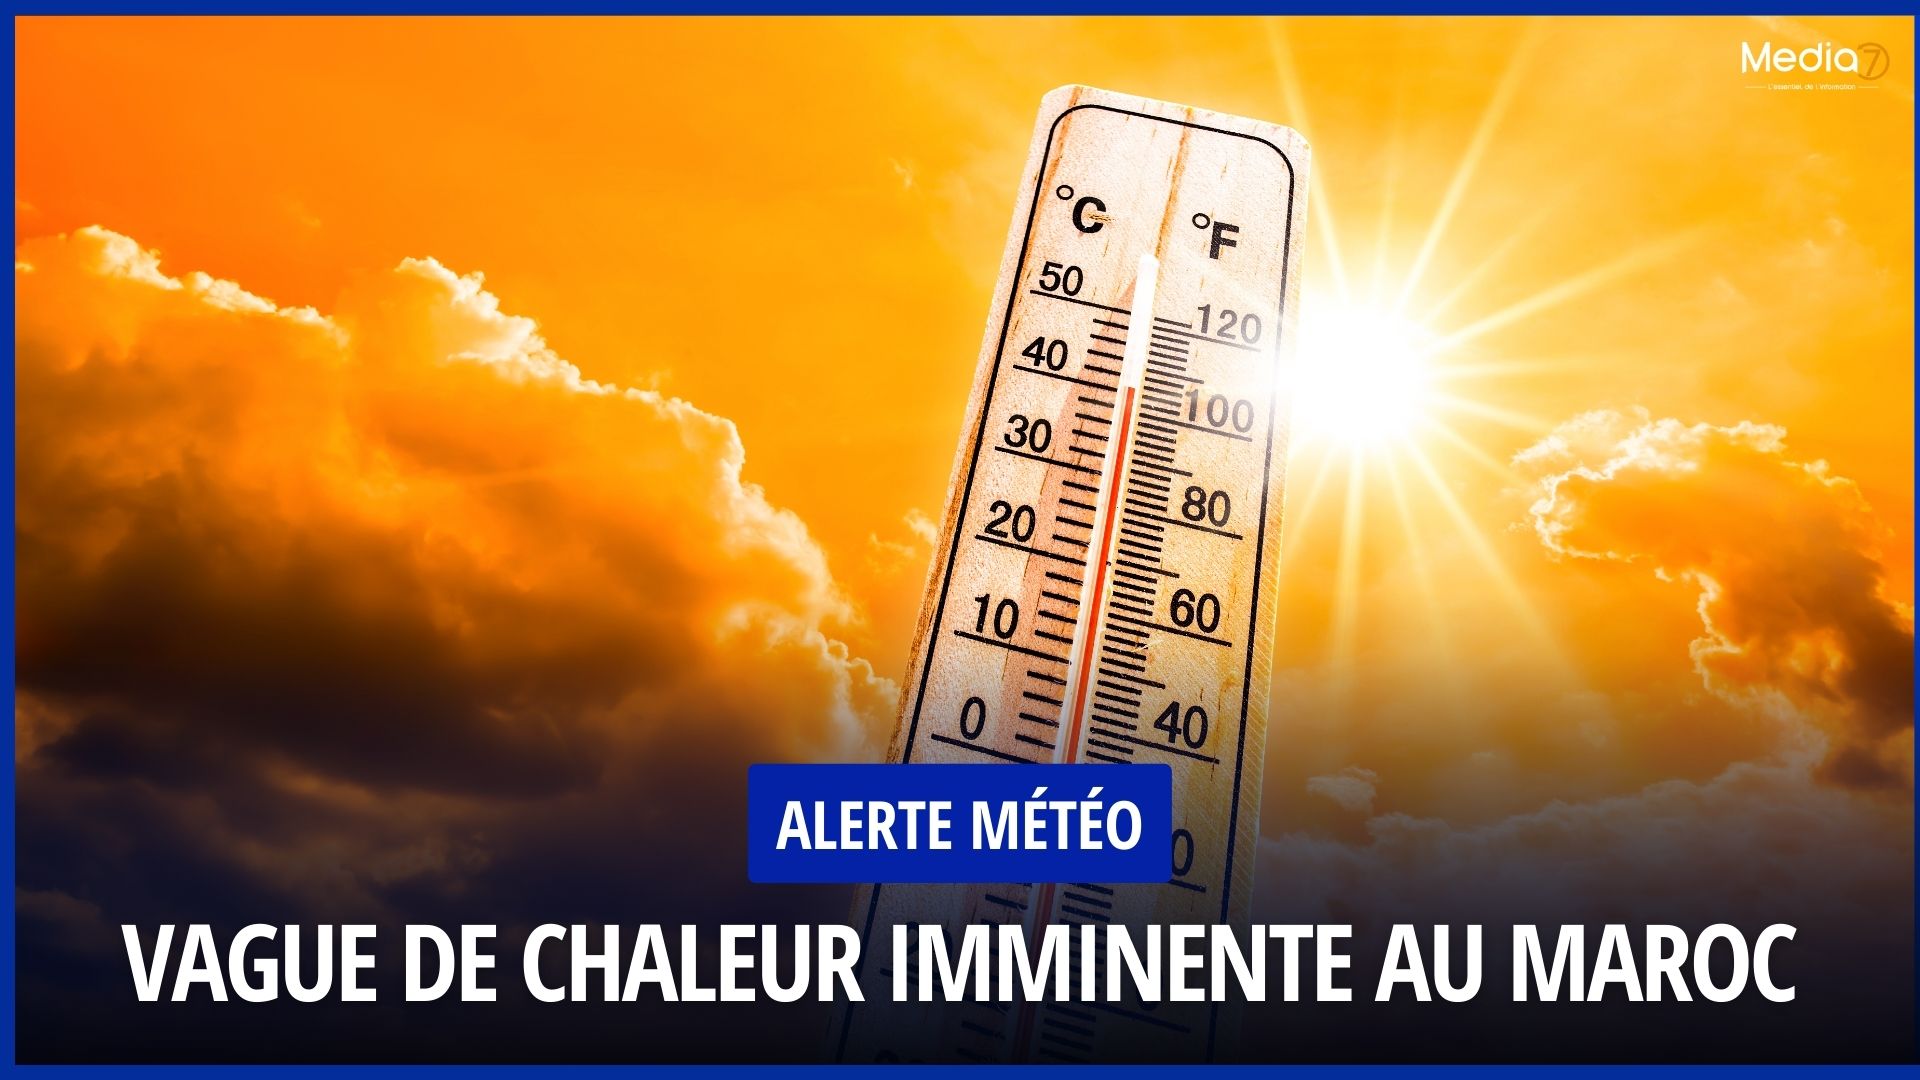 Weather Alert: Imminent Heat Wave in Several Provinces of Morocco